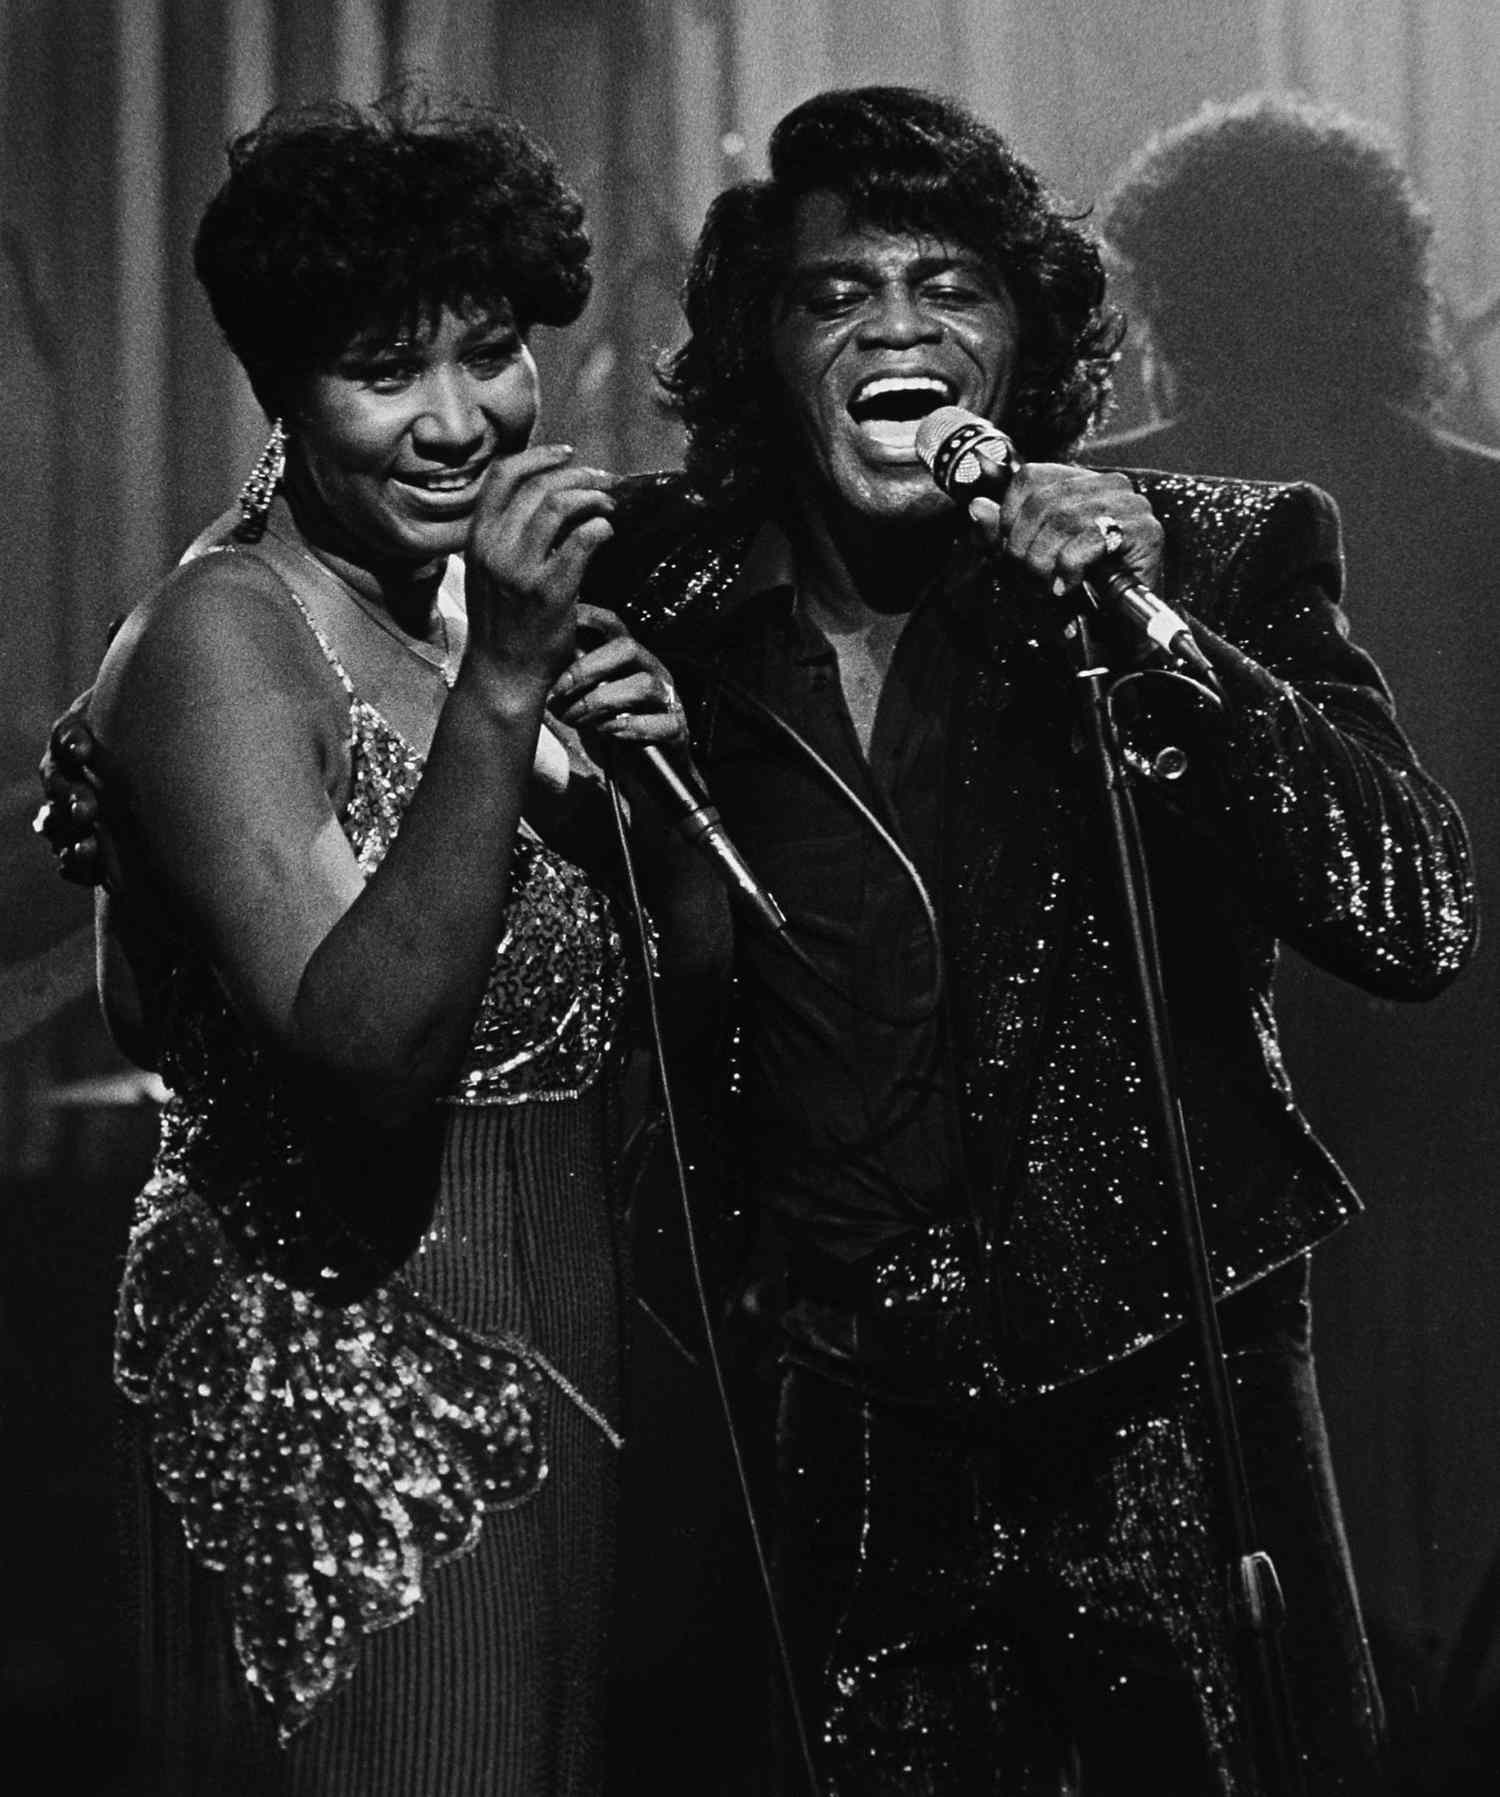 Taping an HBO special with James Brown in 1987